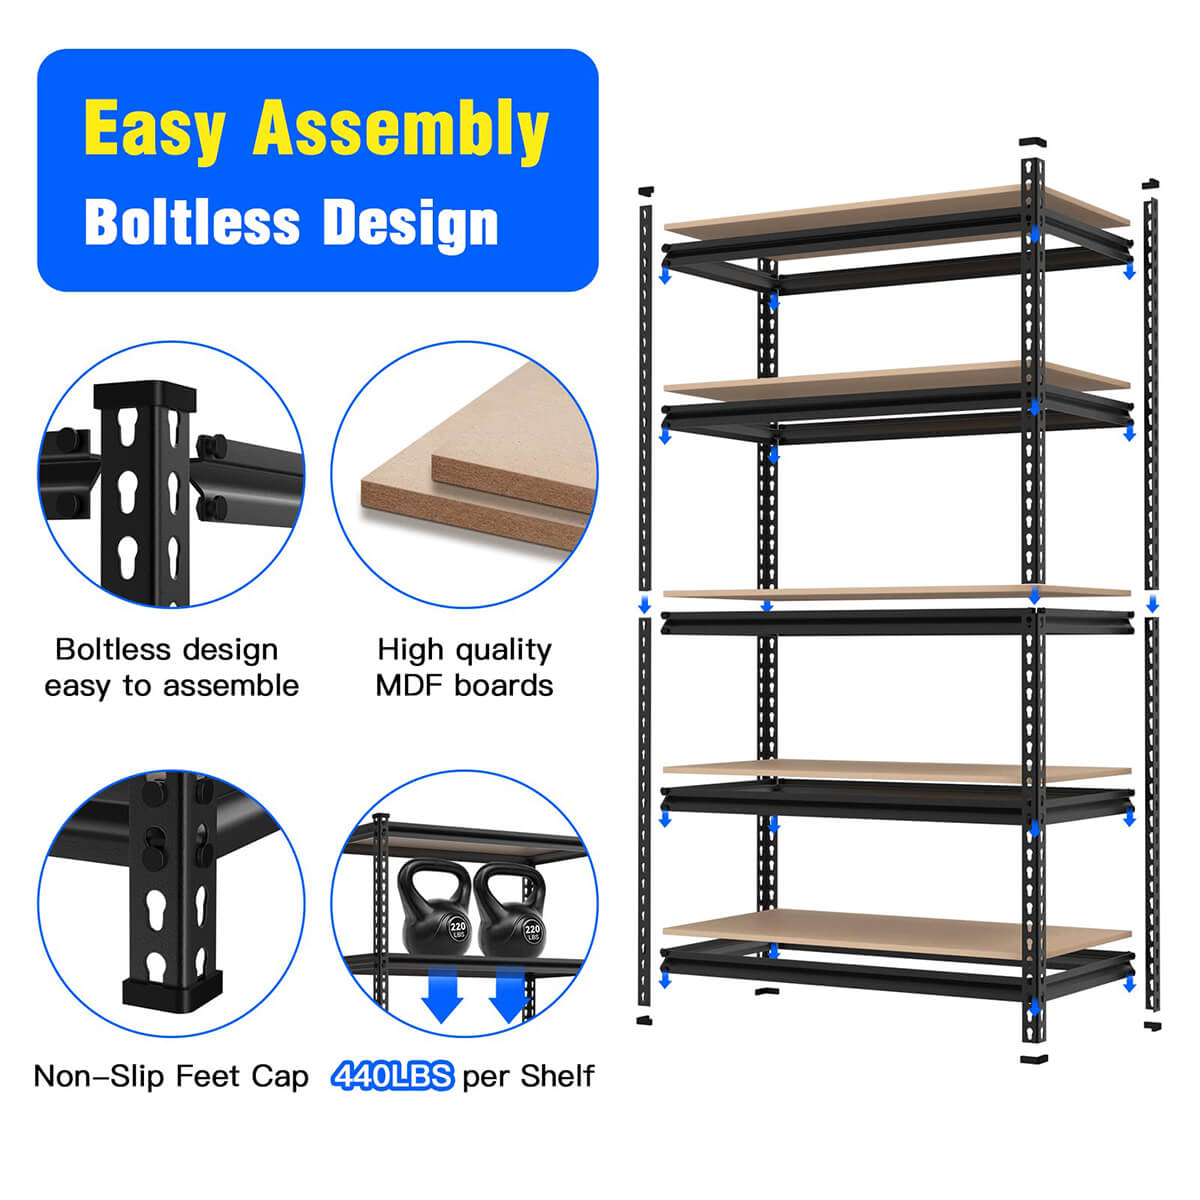 4 features of Elecwish 5-Tier Storage Shelves Adjustable TH715 and it is easy assembbly